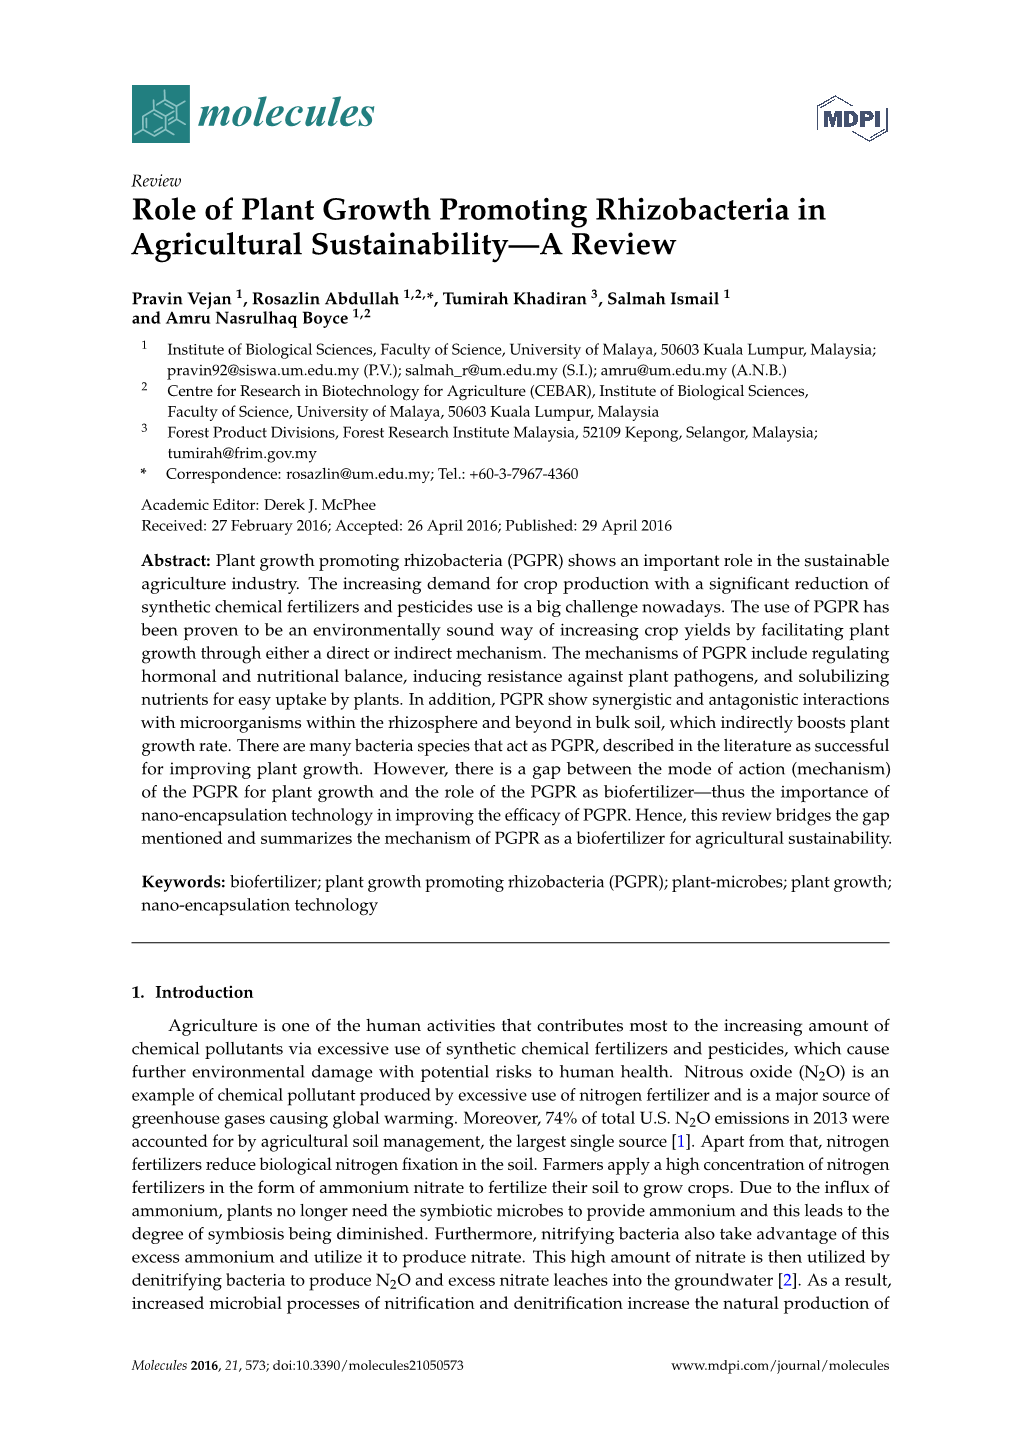 Role of Plant Growth Promoting Rhizobacteria in Agricultural Sustainability—A Review